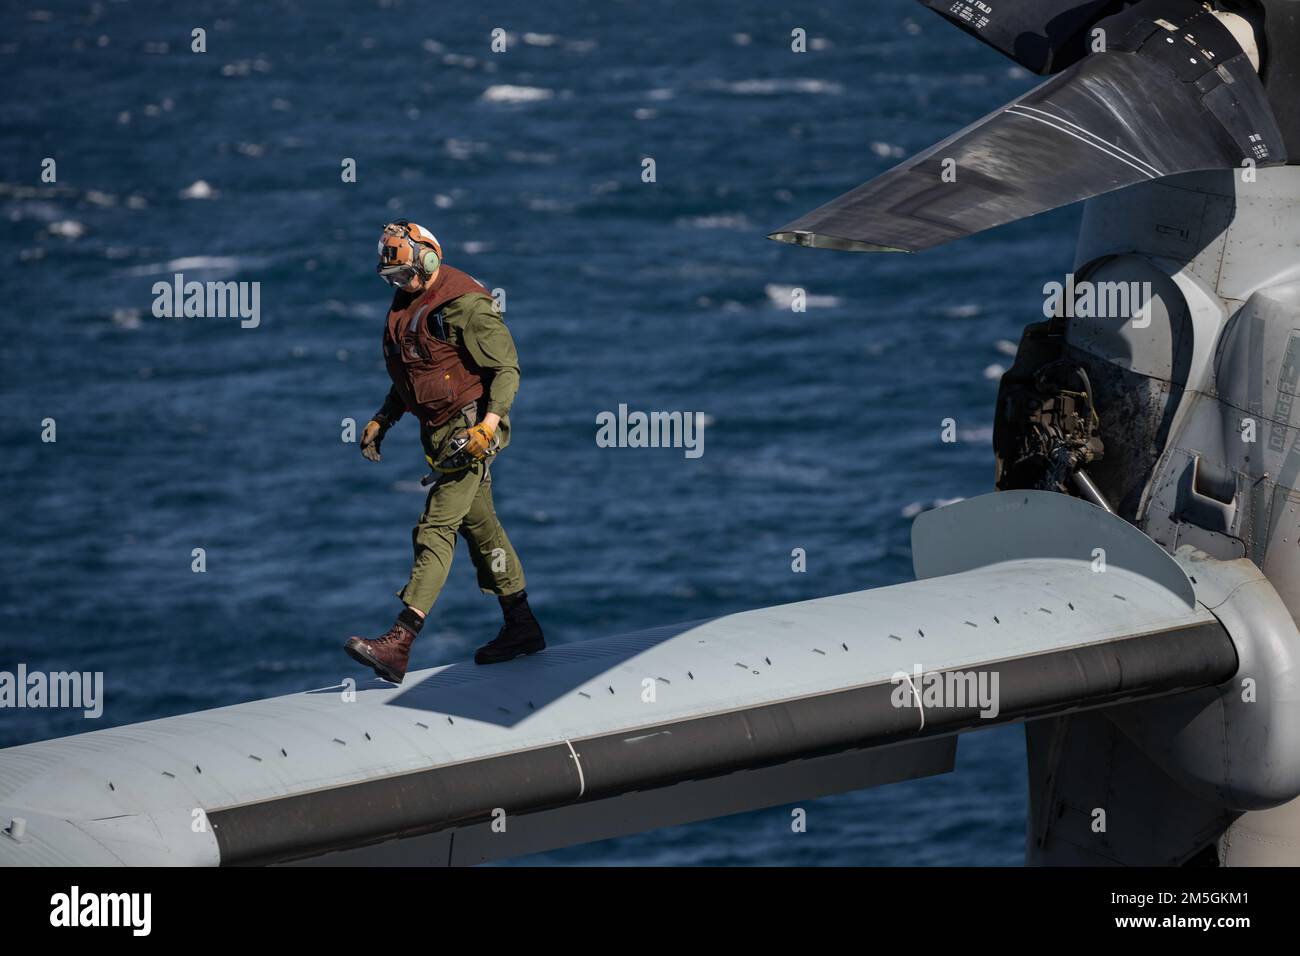 ATLANTIC OCEAN – Lance Cpl. Grant Bishop, a MV-22 mechanic assigned to Marine Medium Tiltrotor Squadron (VMM) 263, 22nd Marine Expeditionary Unit (MEU), walks the wing of a MV-22 Osprey aboard the Wasp-class amphibious assault ship USS Kearsarge (LHD 3) March 17, 2022. The Kearsarge Amphibious Ready Group (ARG) and 22nd MEU are operating in the Atlantic Ocean in support of Naval operations to maintain maritime stability and security in order to ensure access, deter aggression and defend U.S., allied and partner interests. Stock Photo